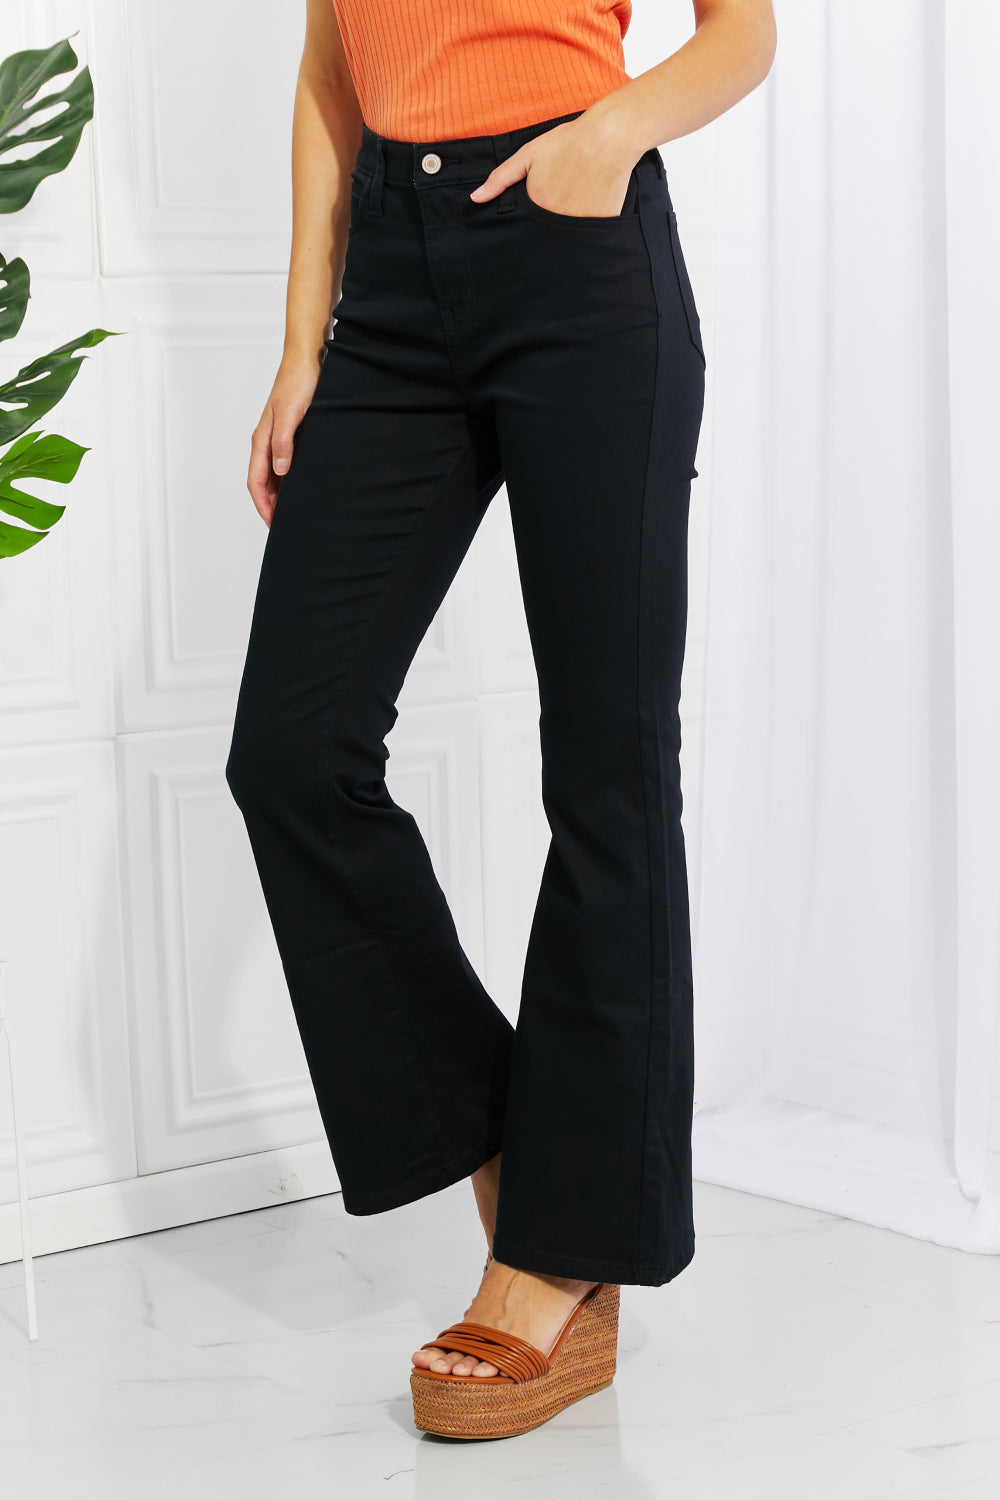 Clementine High-Rise Bootcut Jeans in Black